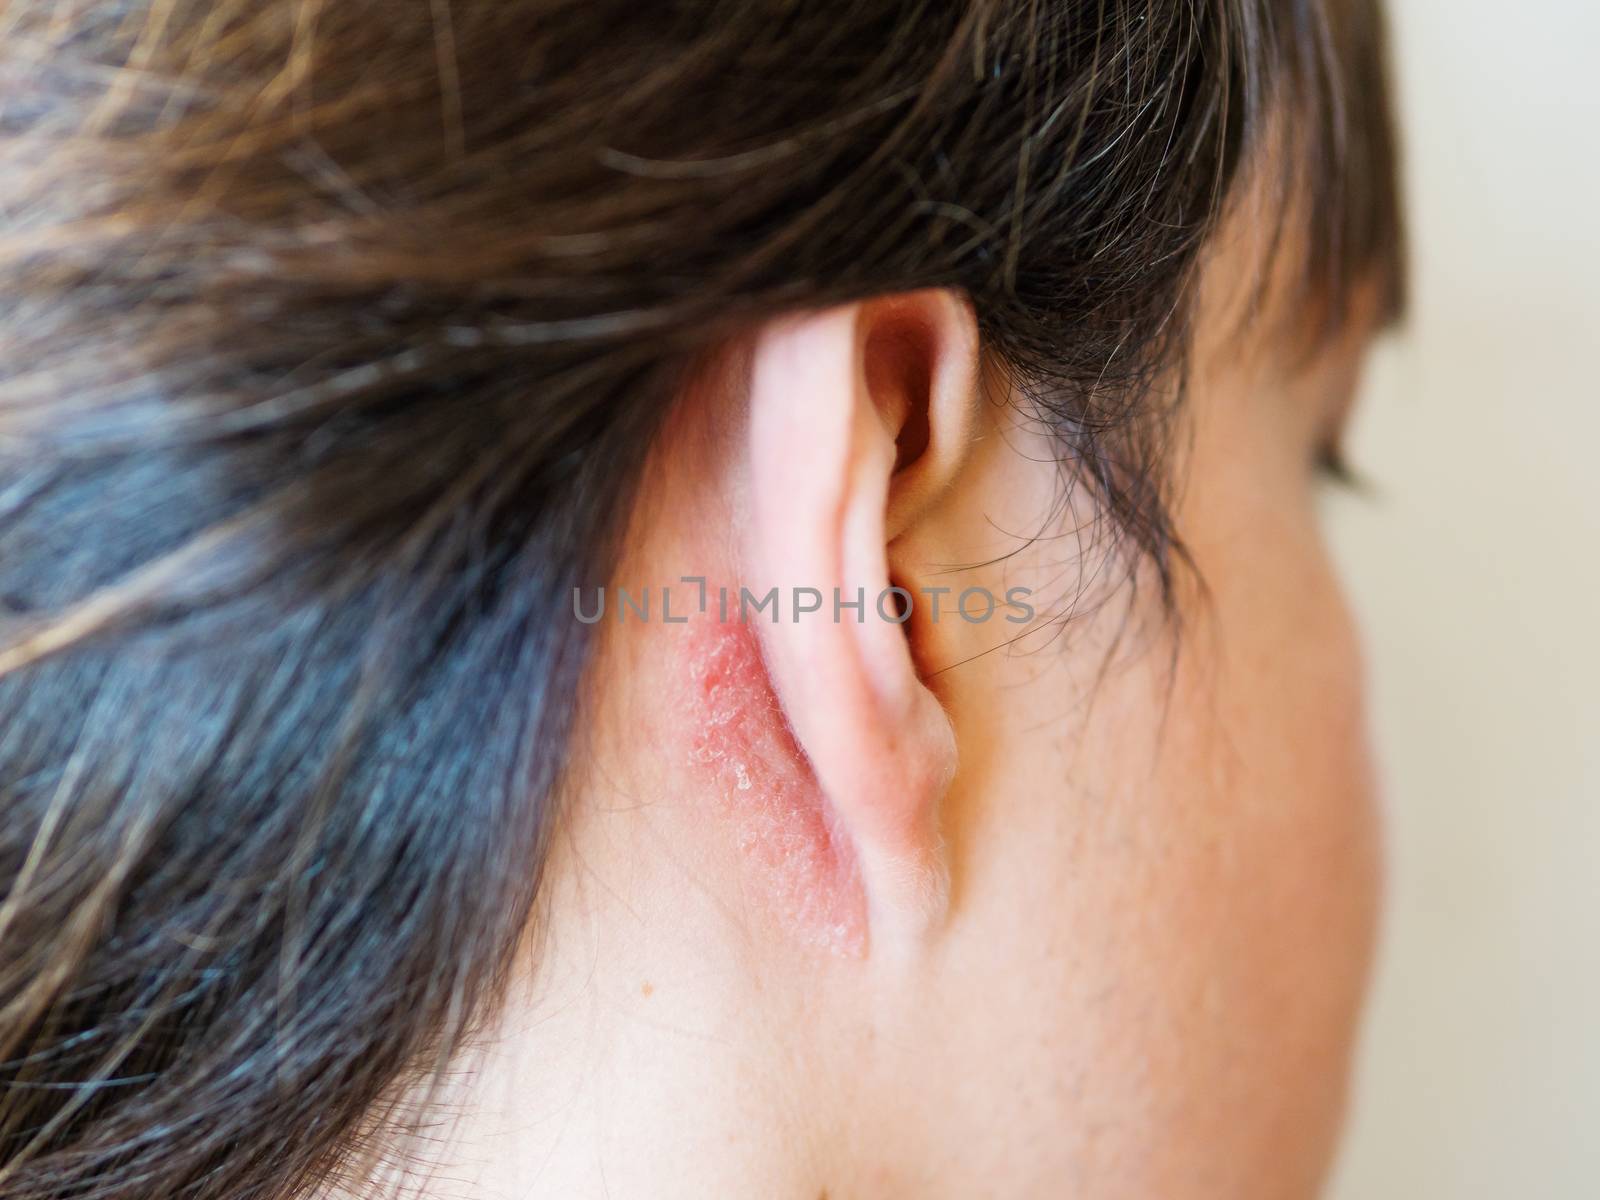 Irritation on the skin behind the ear. Man with flaky skin. Allergy or fungal disease.